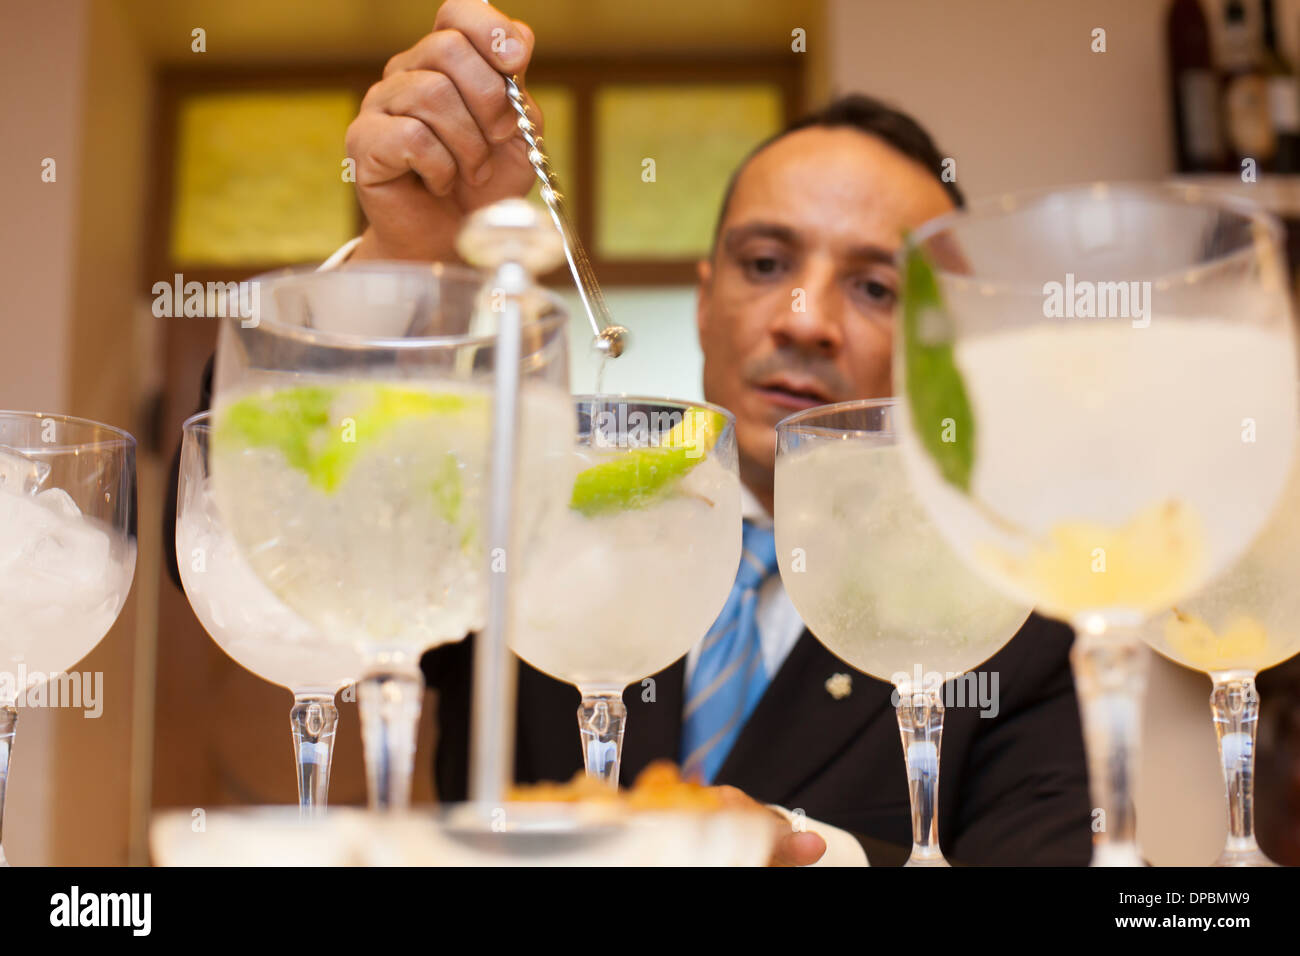 Making and trying various gin and tonic cocktails. Stock Photo